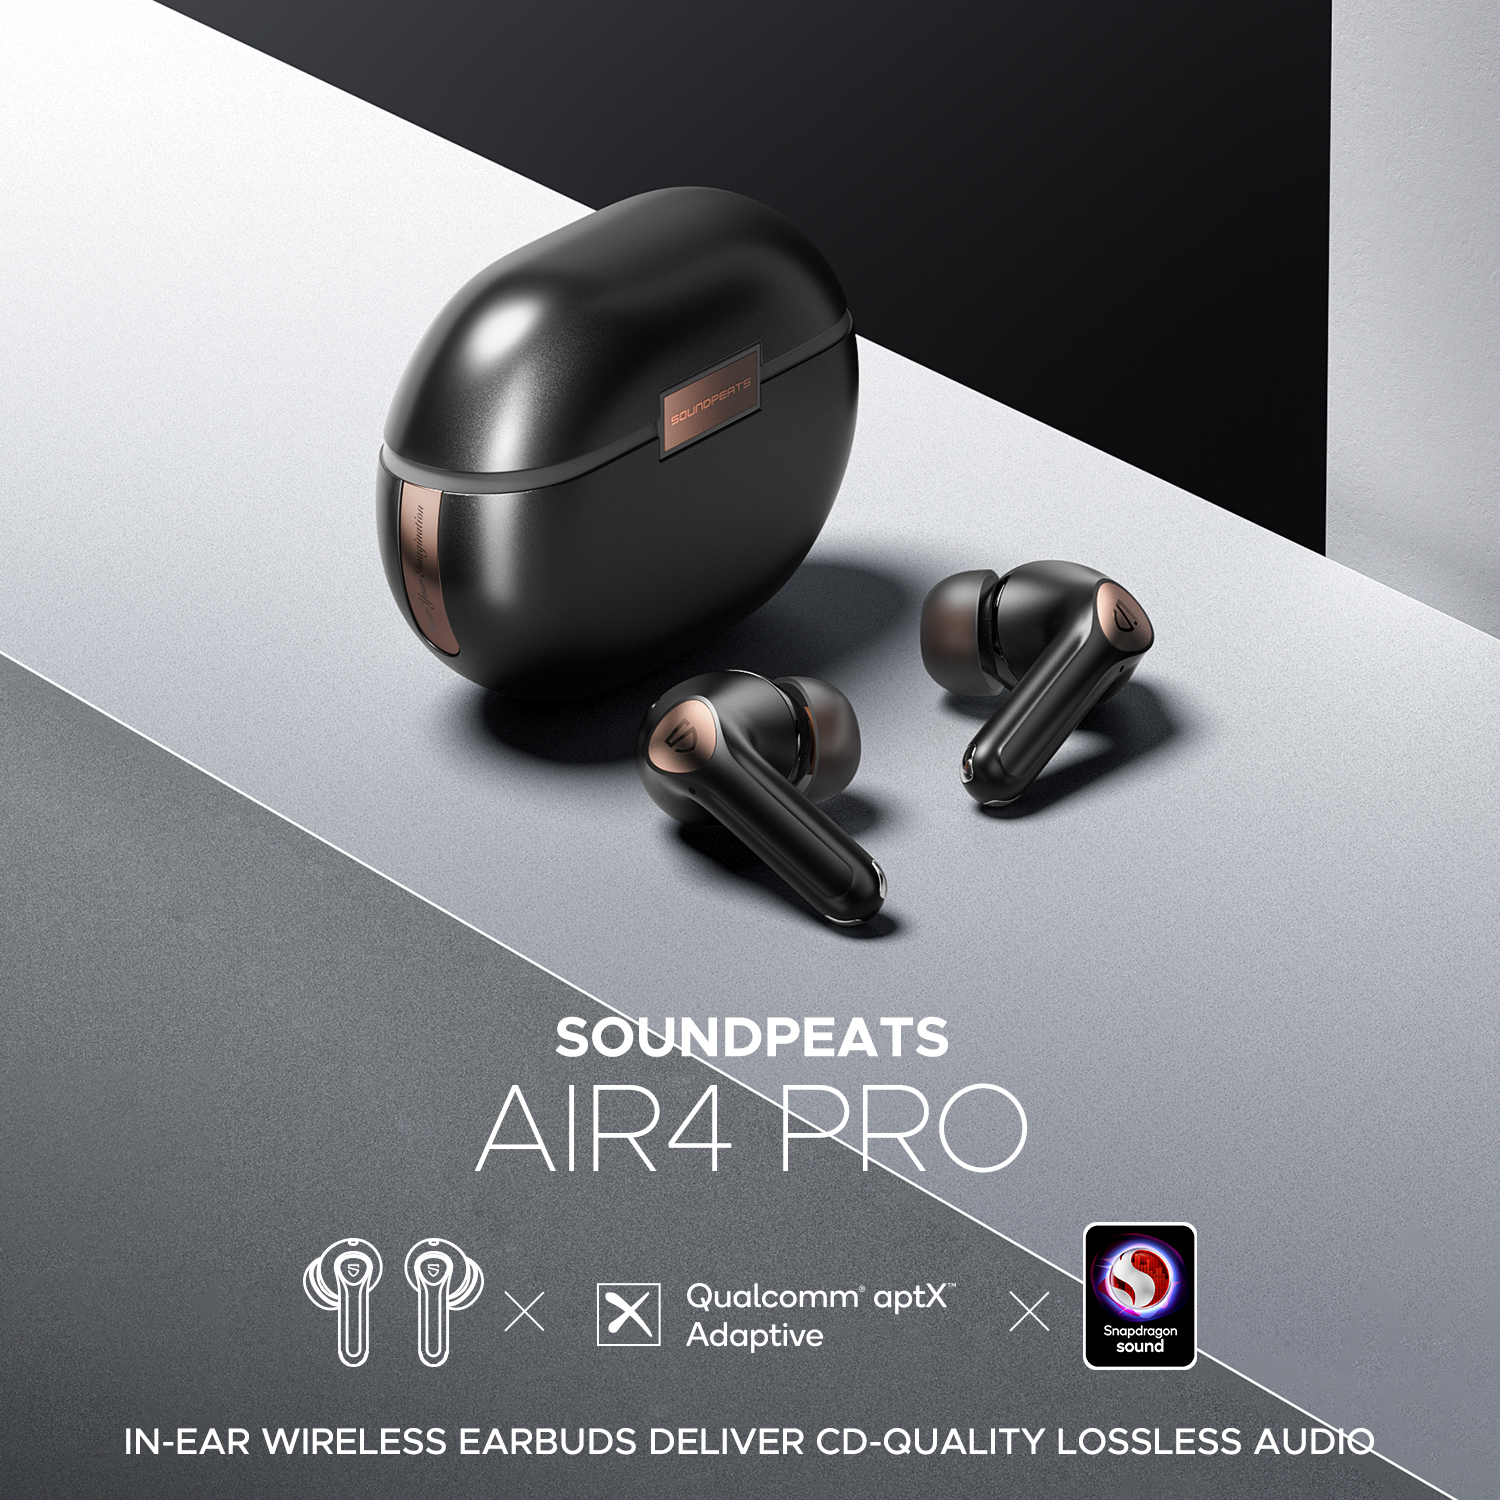 SOUNDPEATS AUDIO on Instagram: 2⃣ DAYS TO GO  SOUNDPEATS Air4 Pro ⚙AptX  Lossless is provided as part of Qualcomm's next-generation wireless audio  technology Snapdragon Sound, and by connecting compatible devices, you